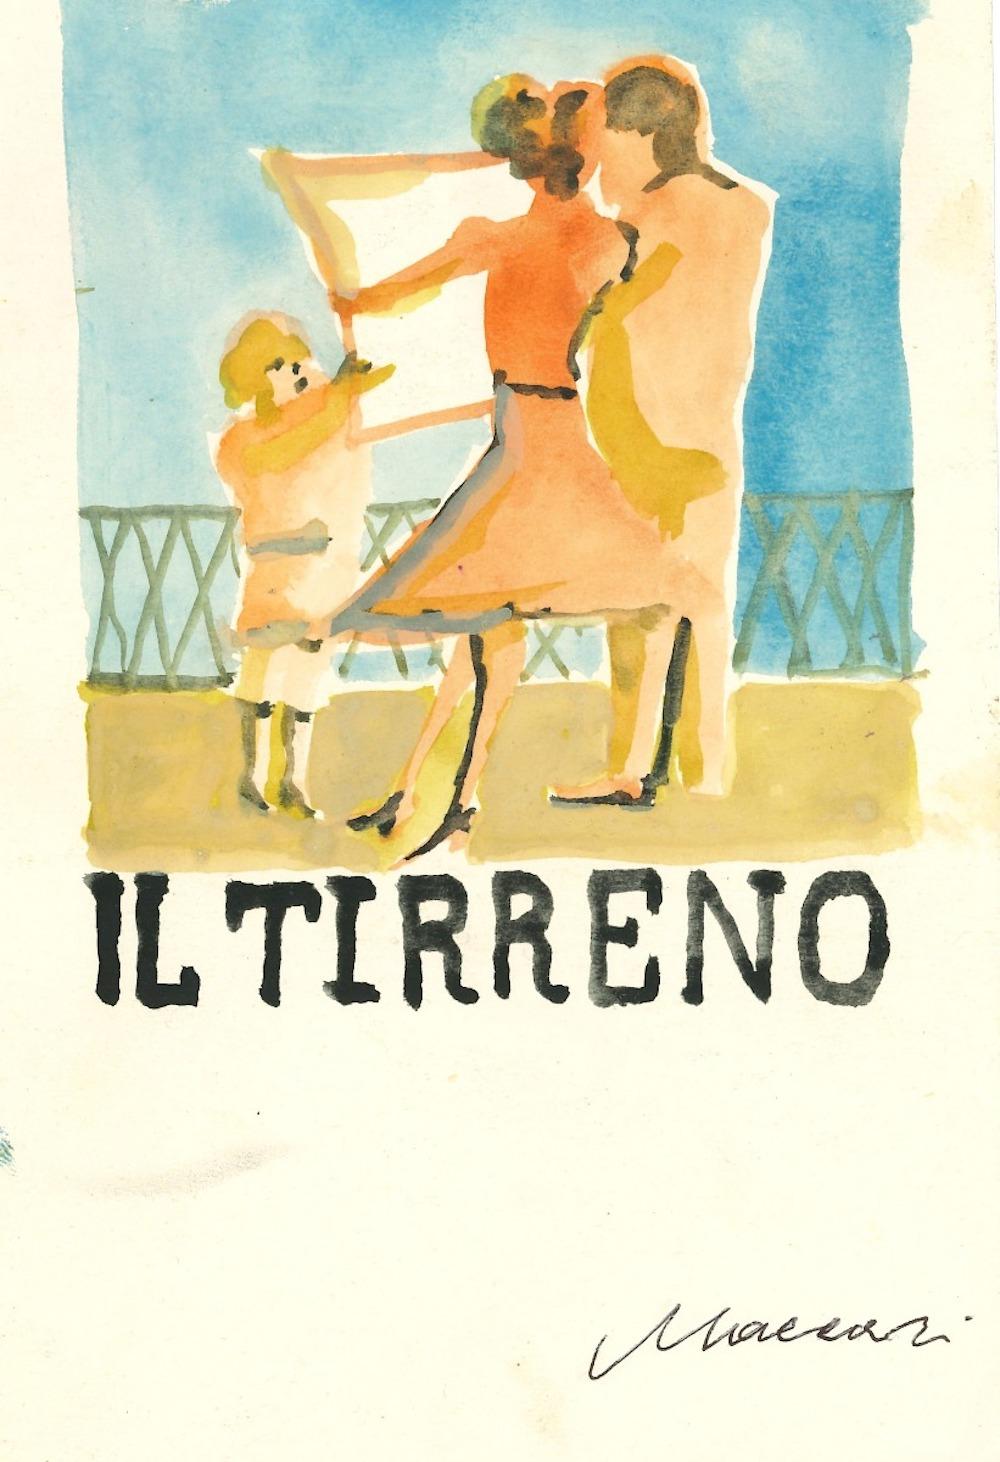 Original artwork realized by Mino Maccari in the 1960s.

Mixed colored watercolor drawing on cardboard realized for the newspaper "Il Tirreno".

Hand-signed by the artist on the lower margin. 

Original tiltle on the lower center: Il mattino

Good